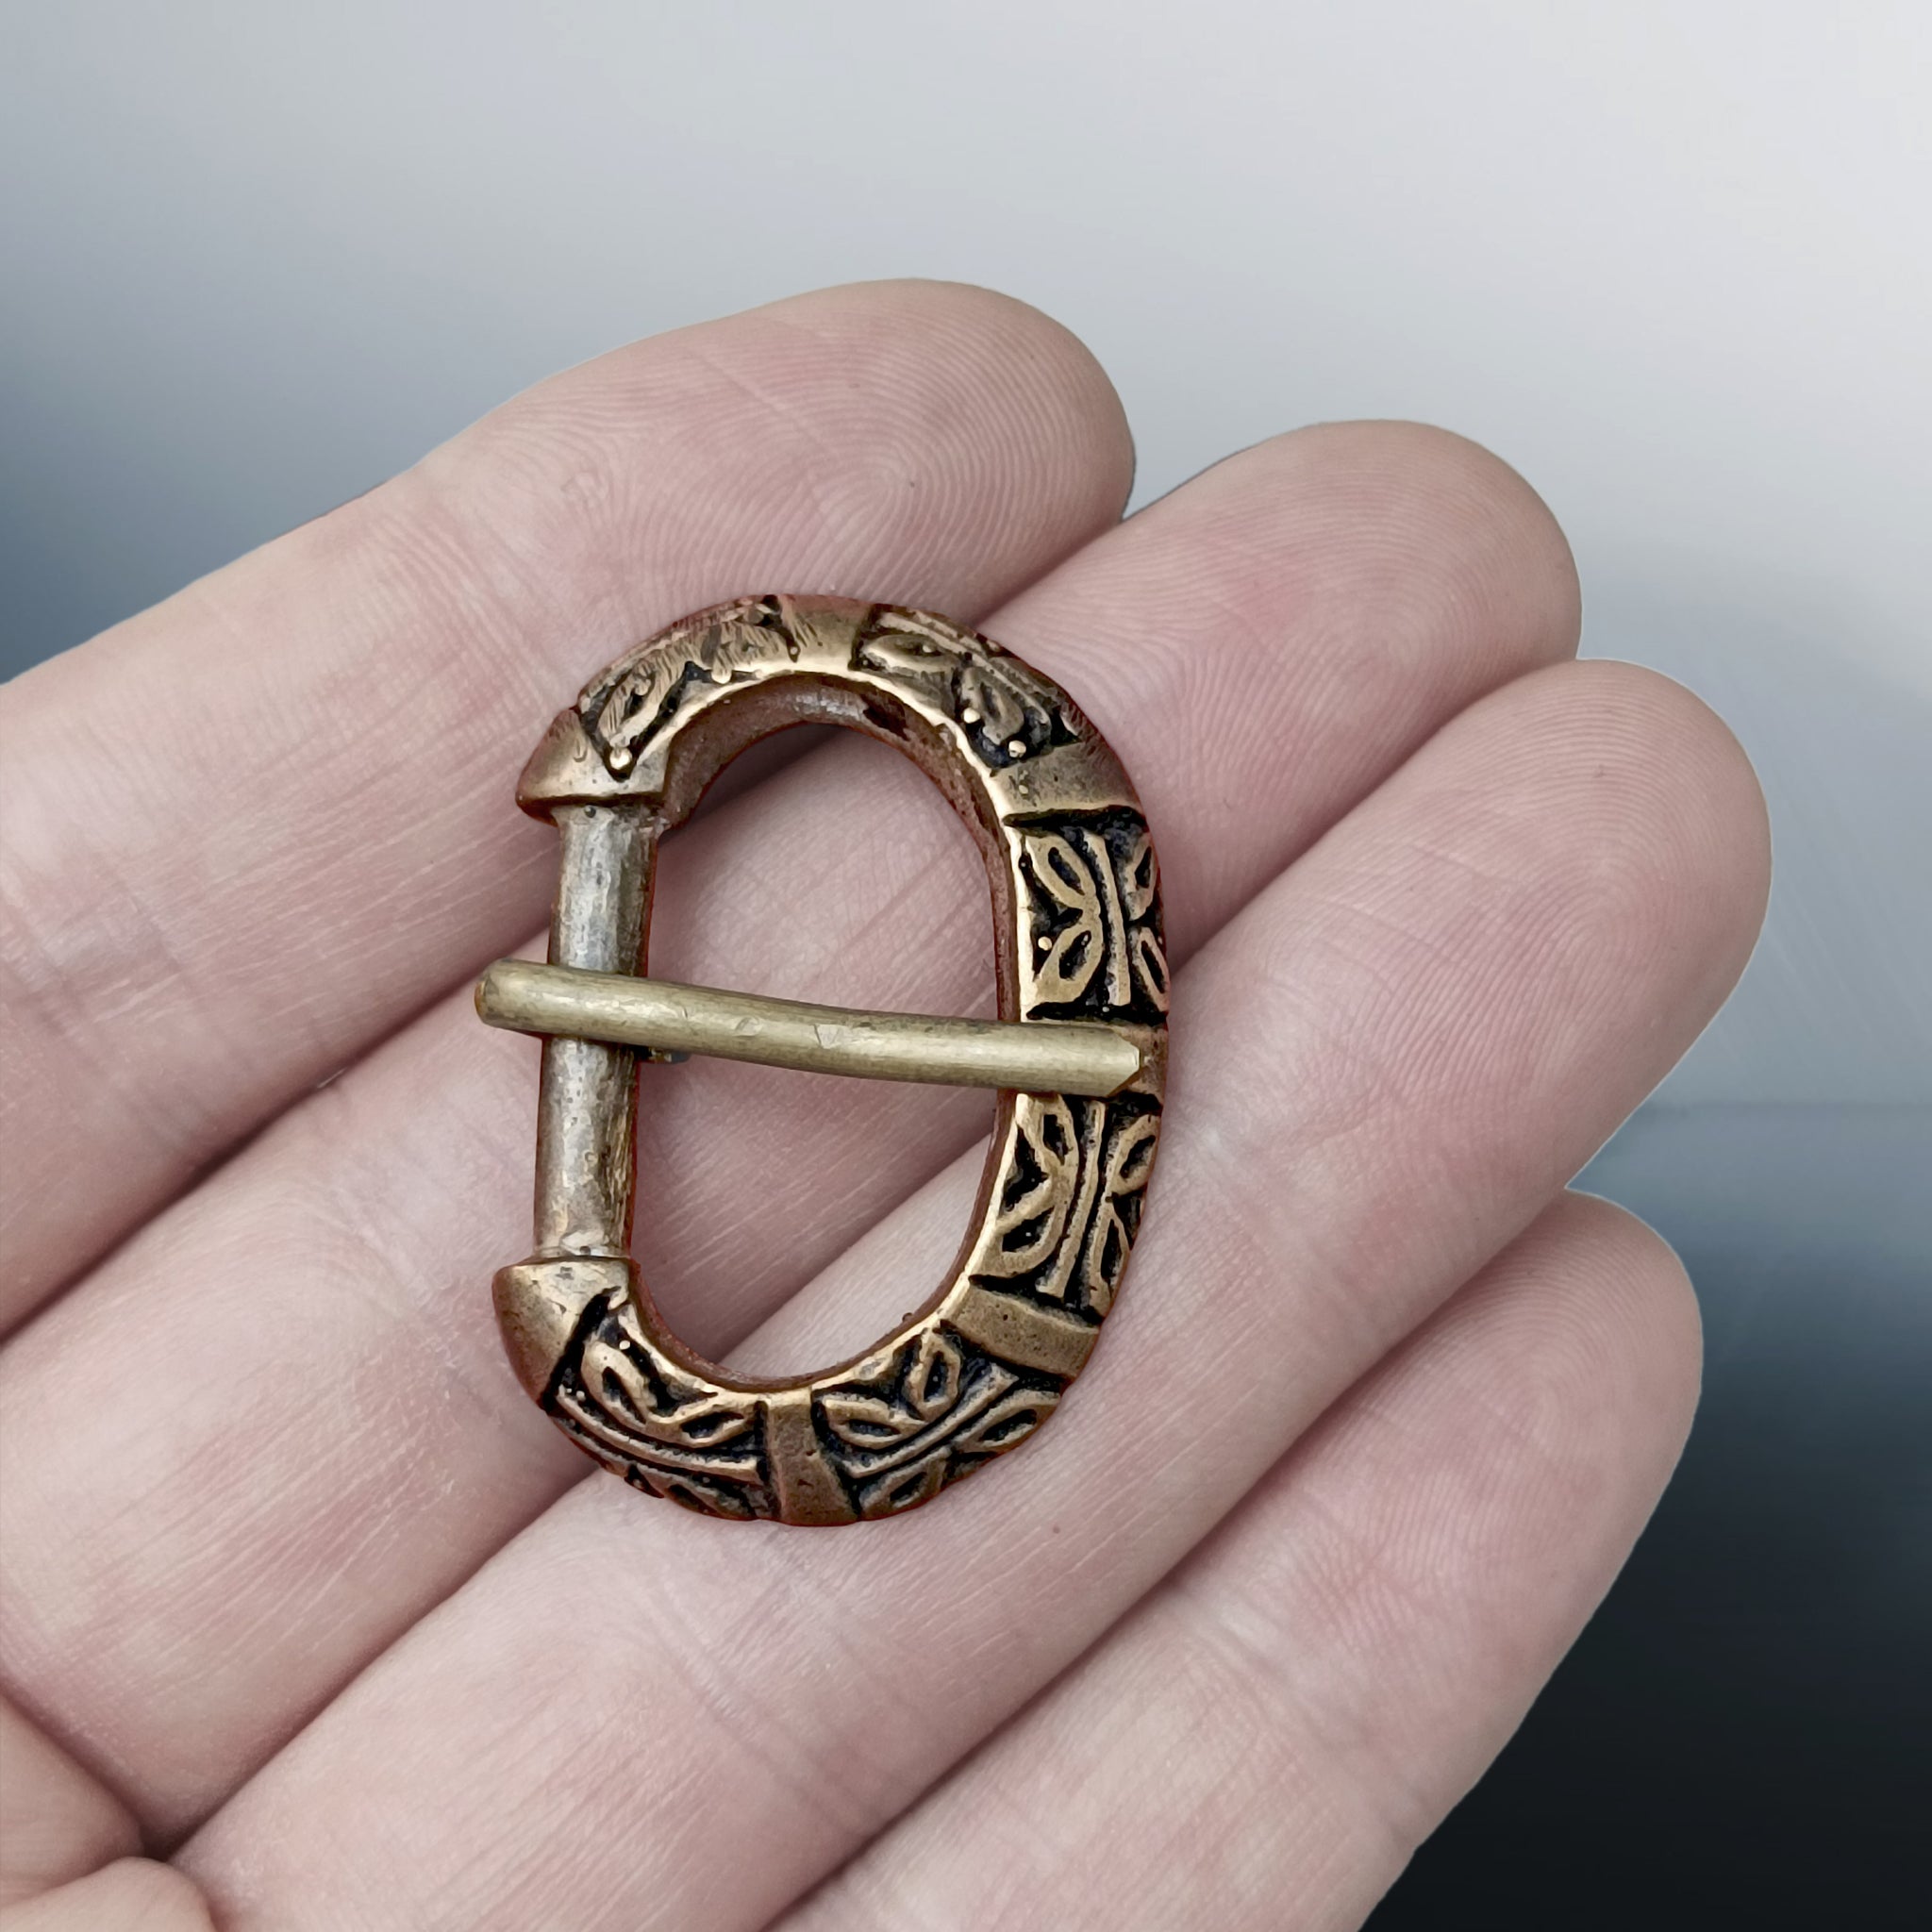 Viking Cloak Pin from Birka with Wolf Heads Borre and Jelling